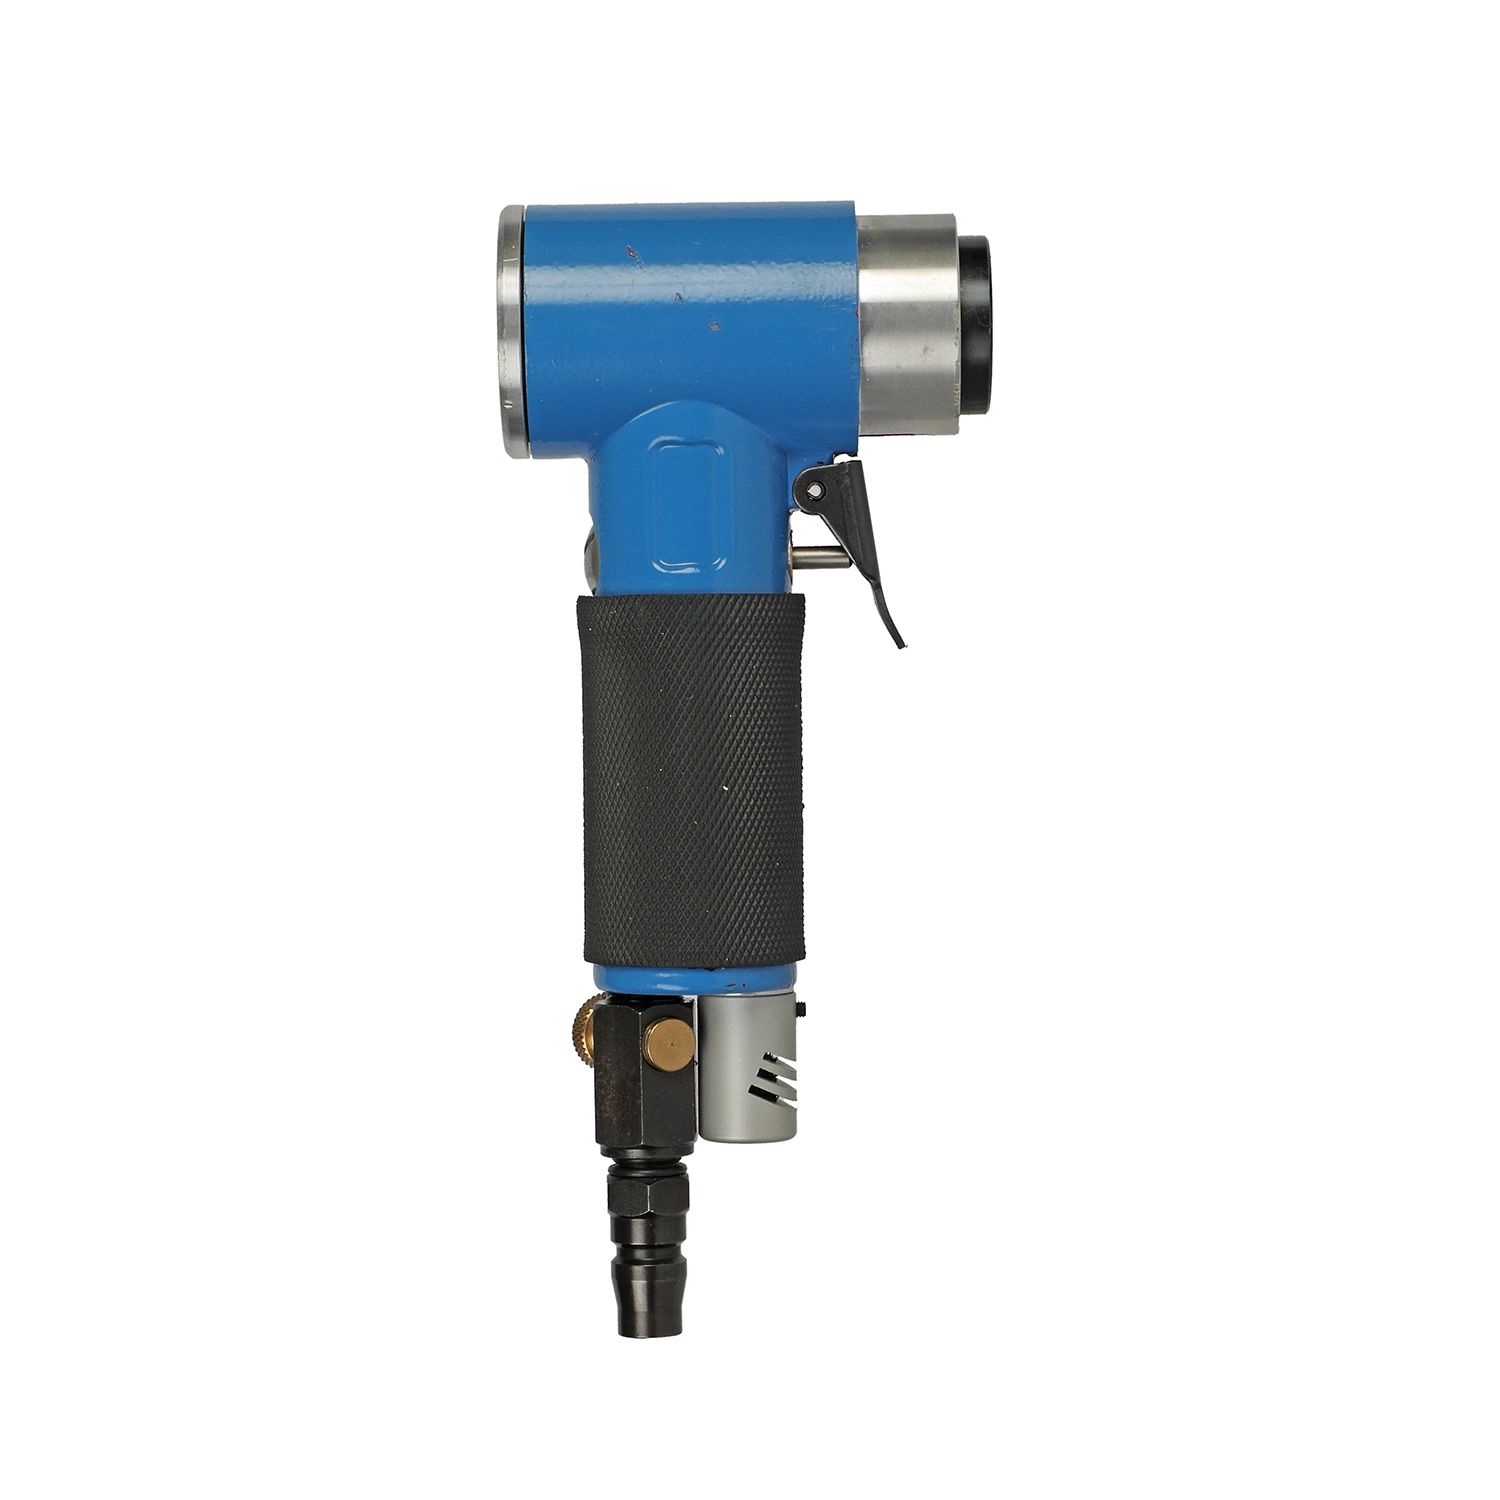 Concentric Running Mini Air Pneumatic Sander for 50mm and 75mm Pad